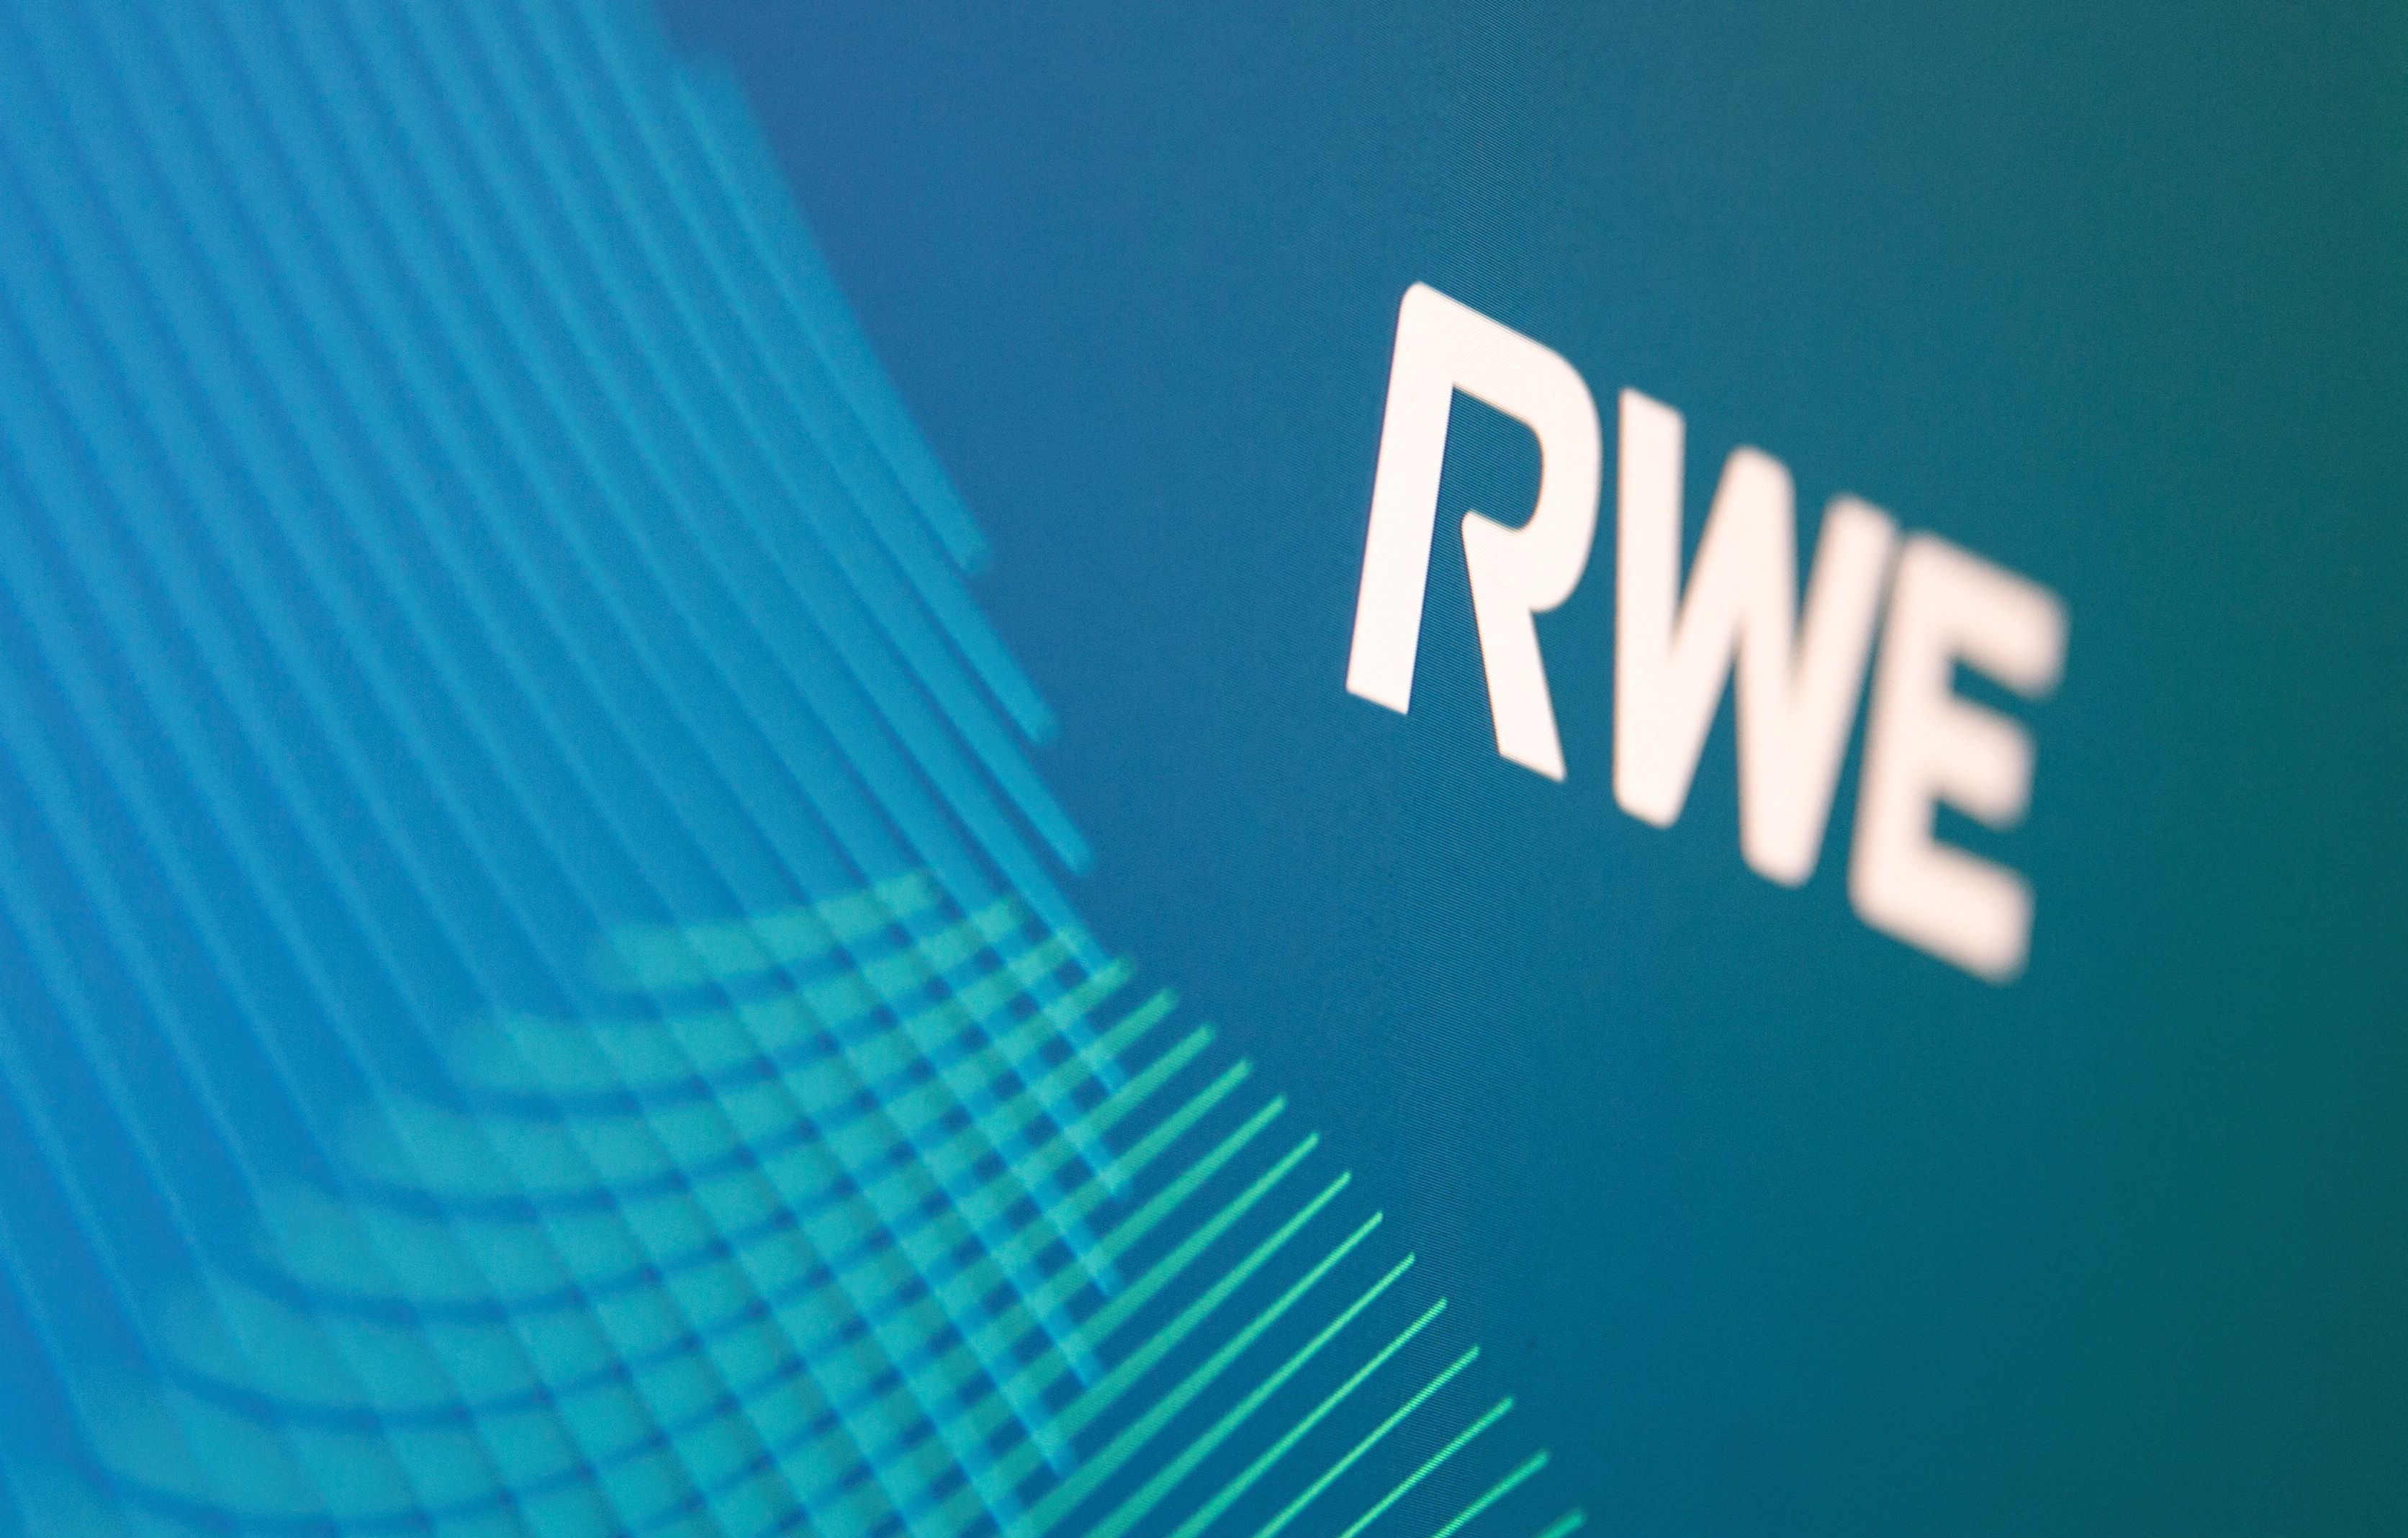 RWE logo is seen in this illustration